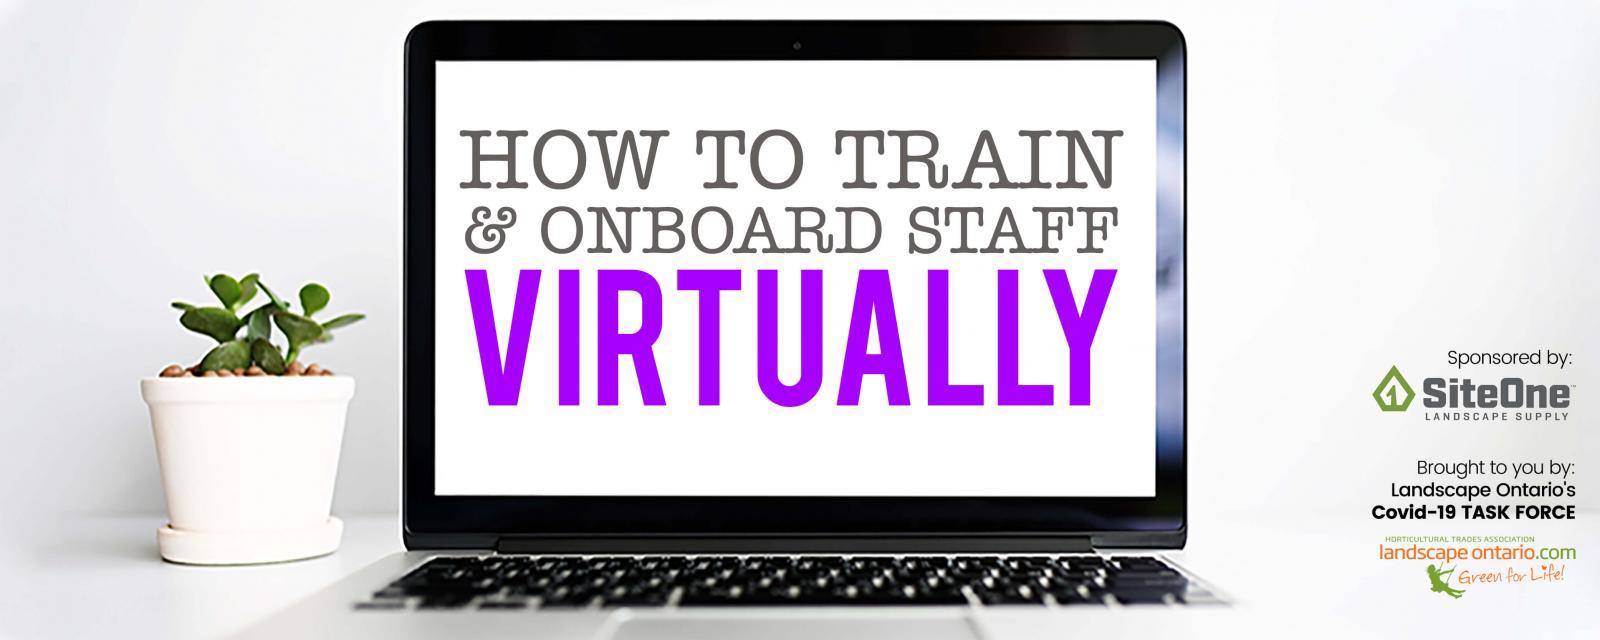 how to train and onboard staff virtually 